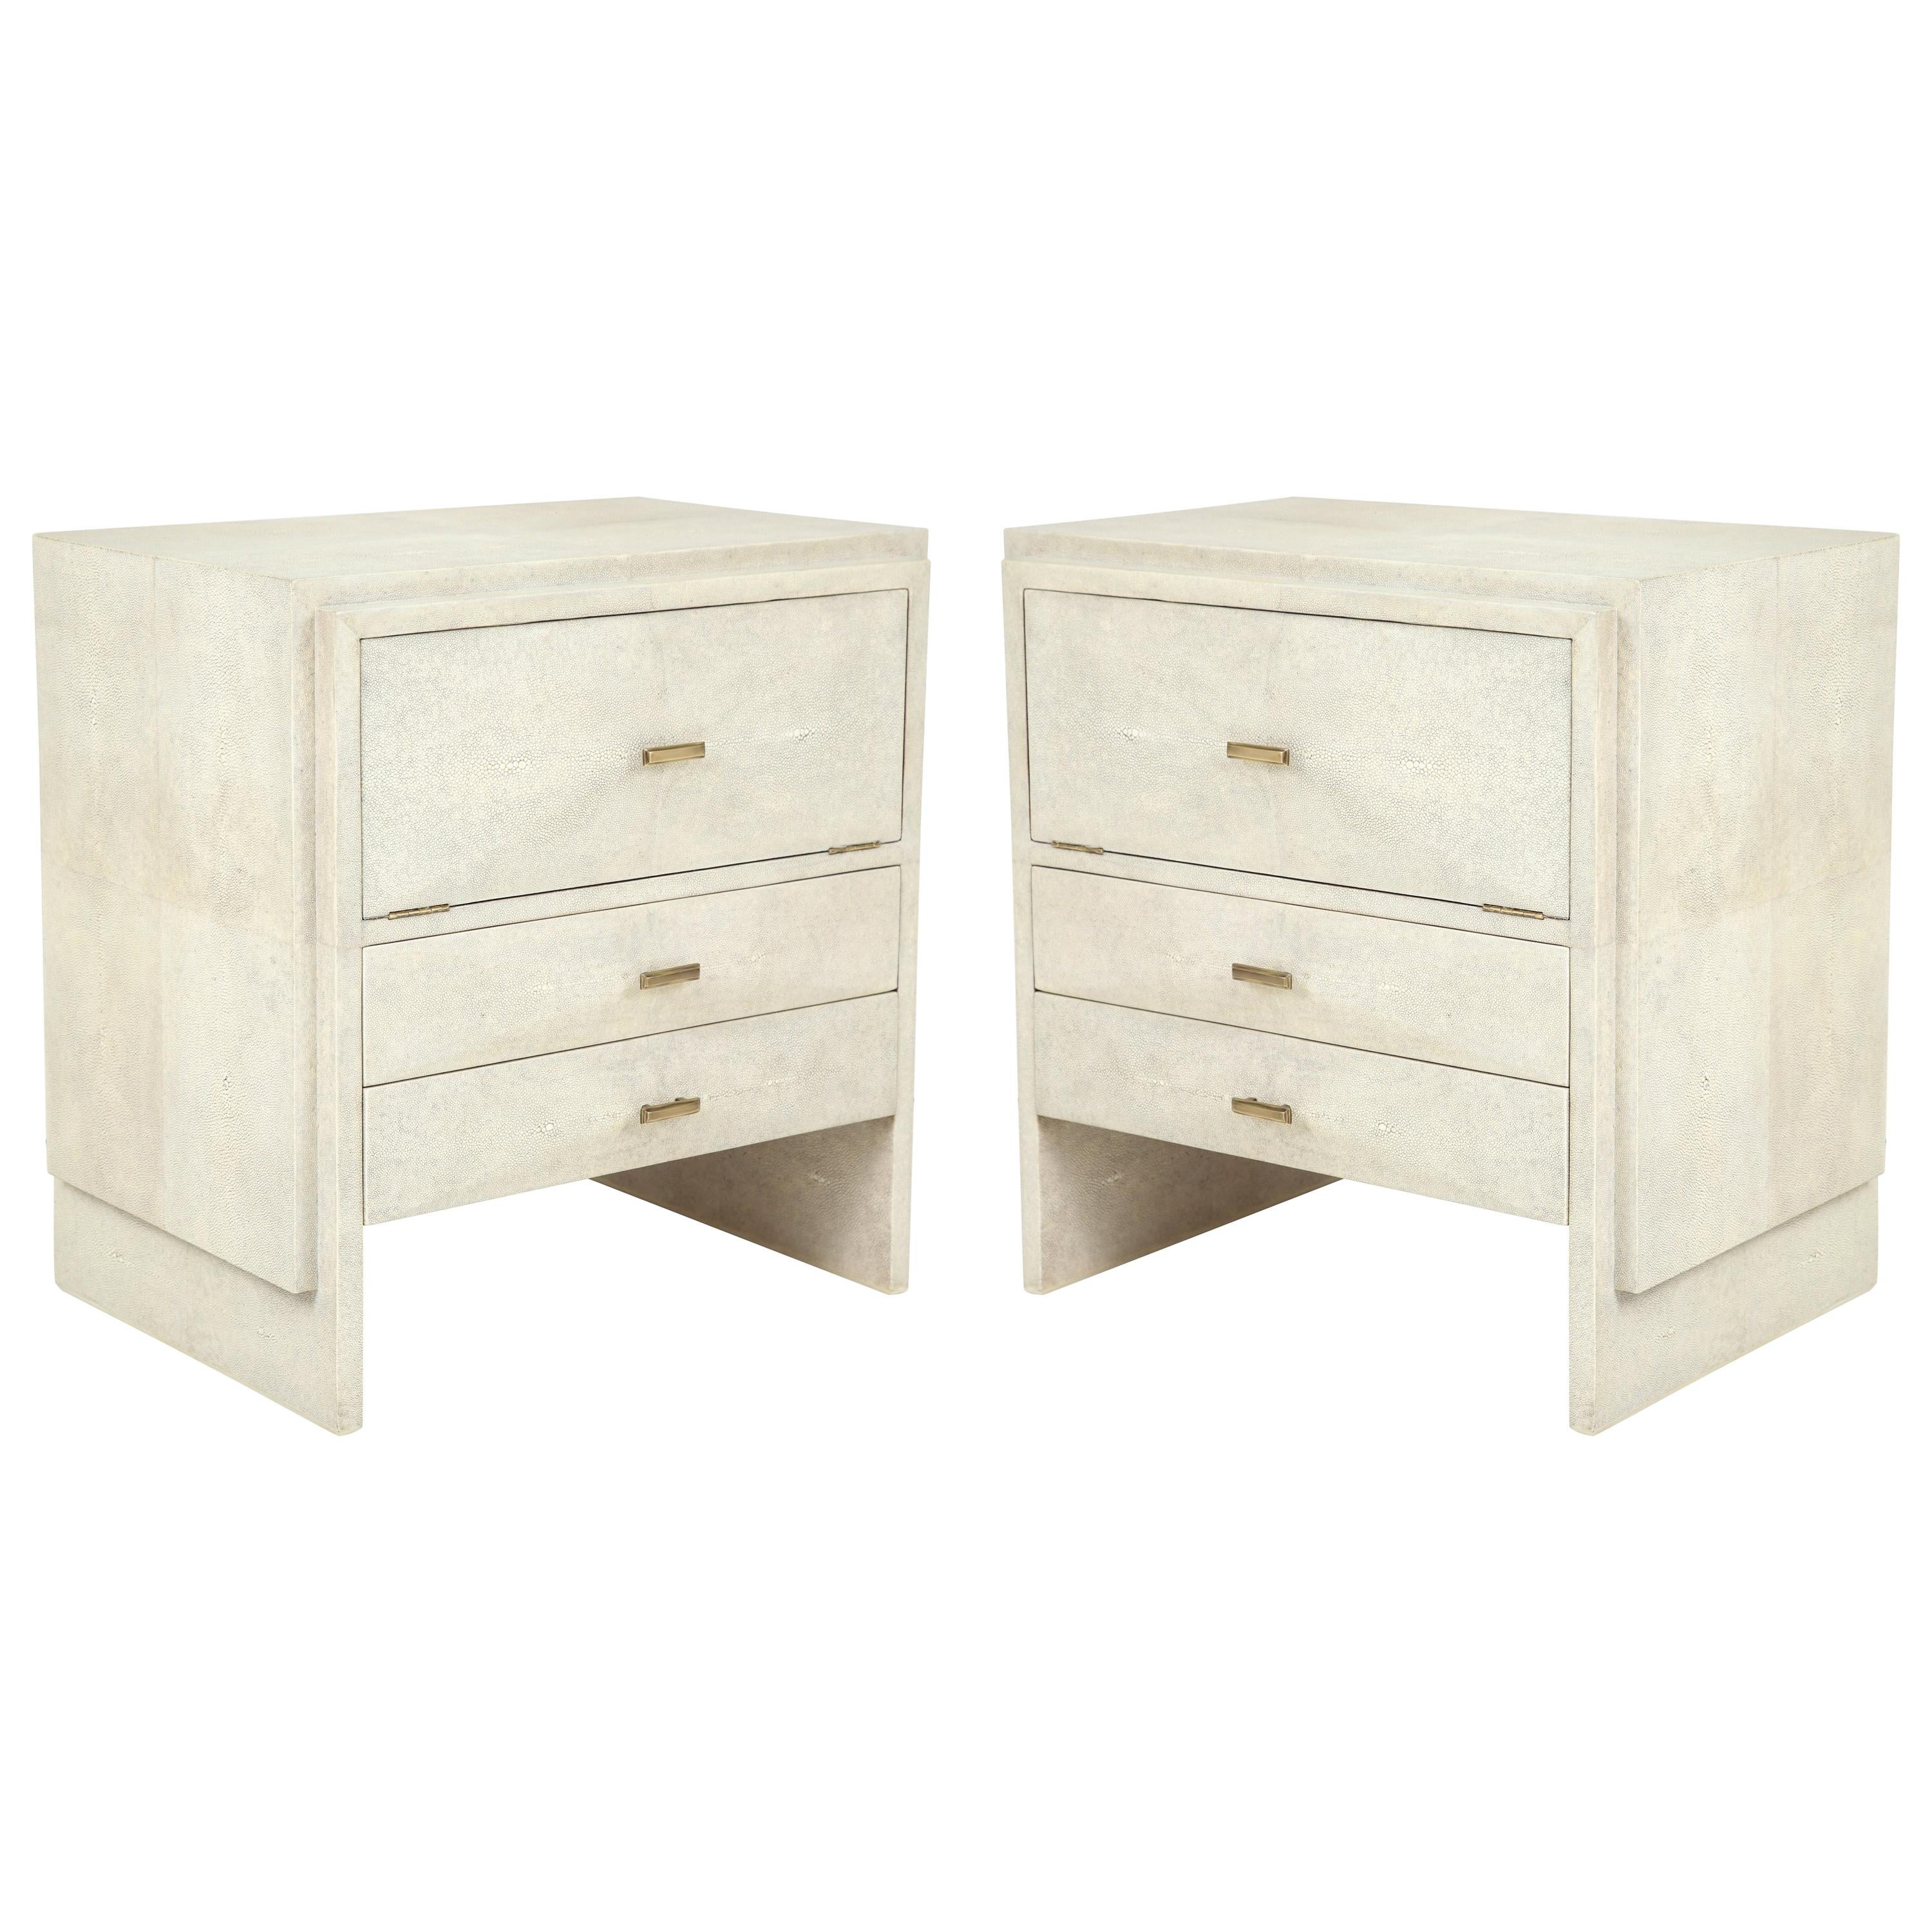 Shagreen Side Tables or Nightstands, Designed In France, Cream Colored Shagreen